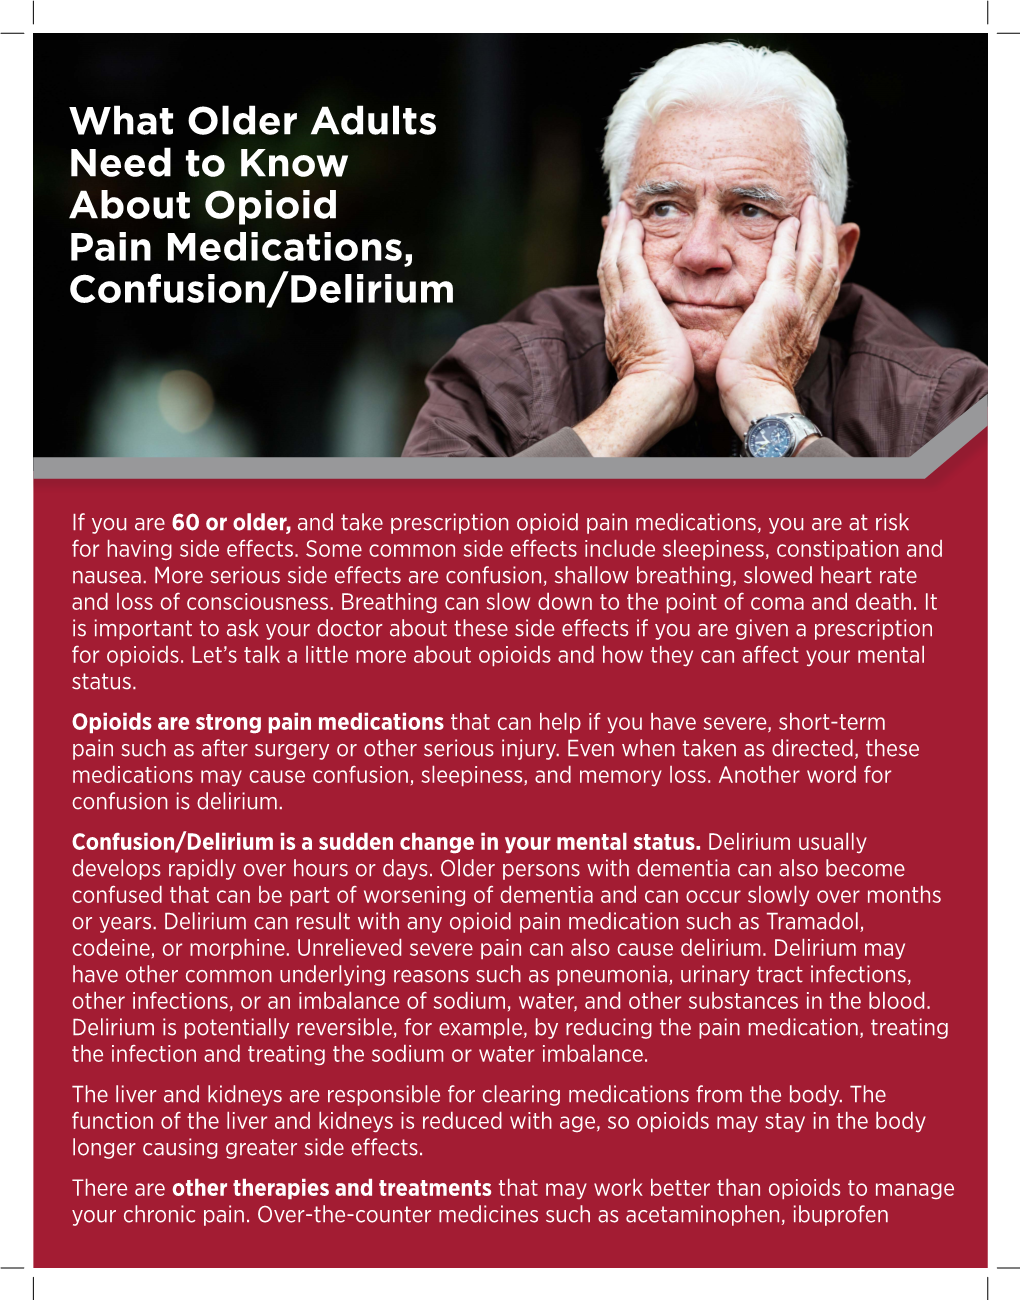 What Older Adults Need to Know About Opioid Pain Medications, Confusion/Delirium